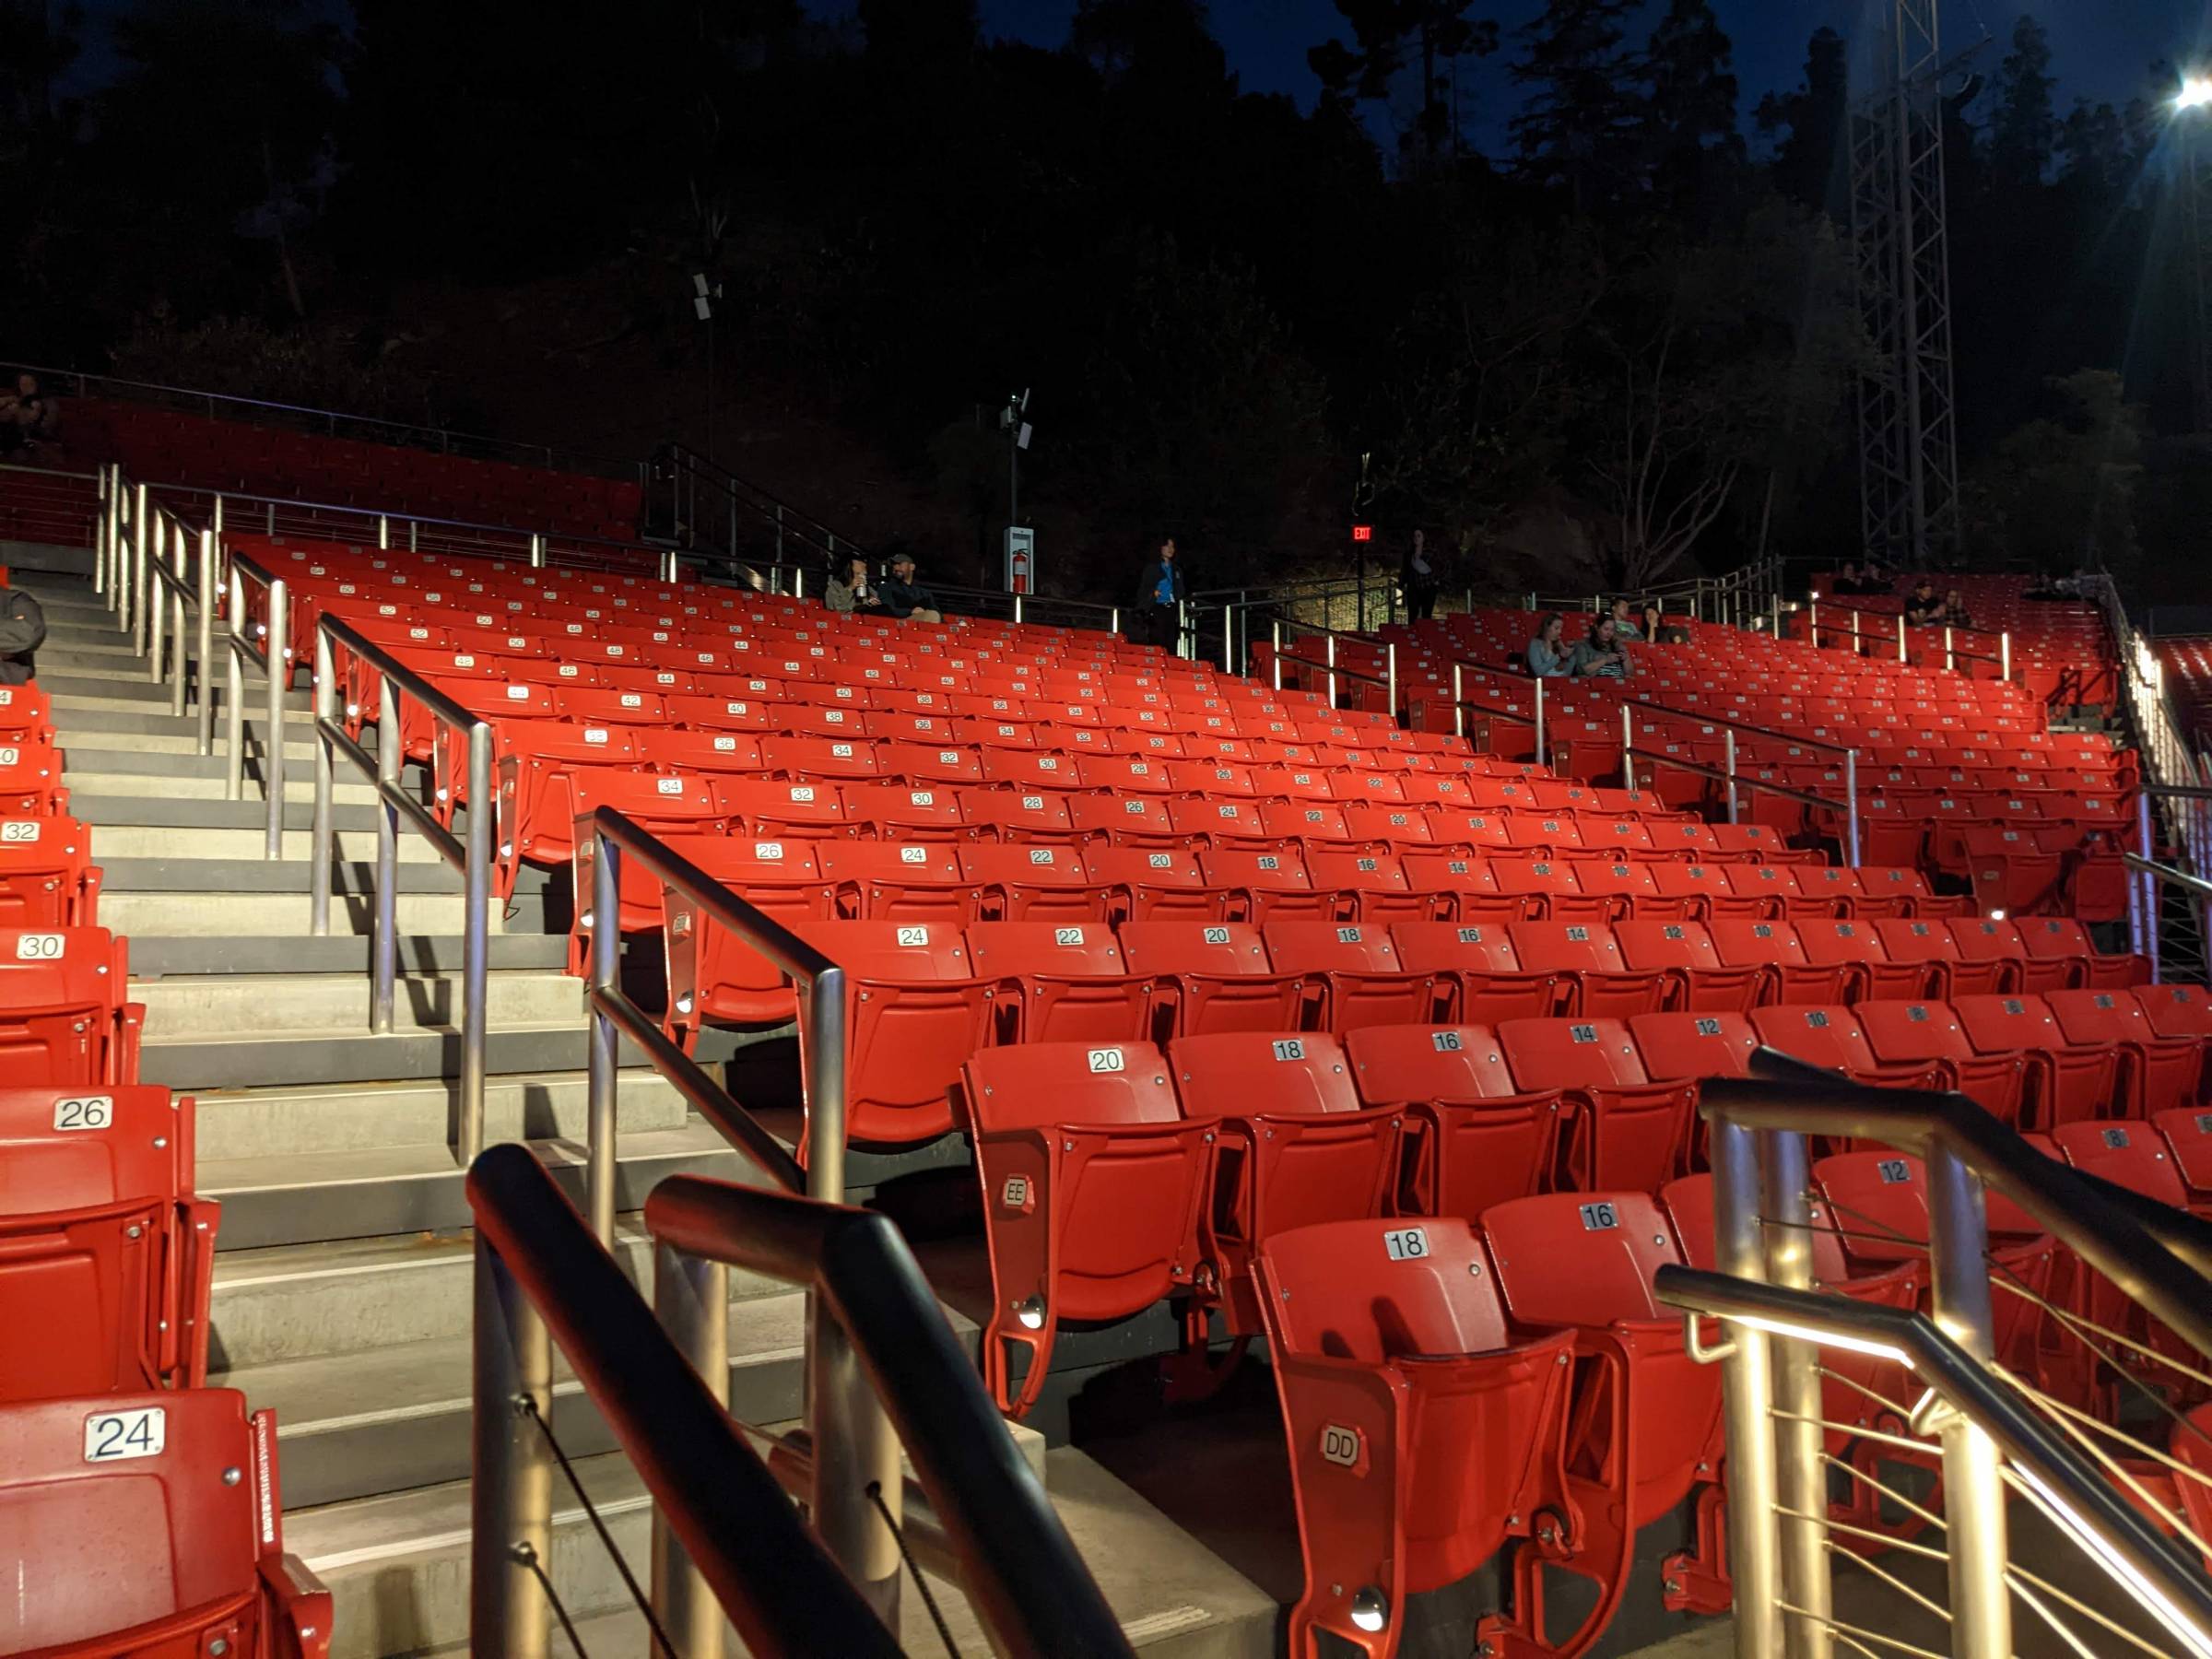 south terrace at greek theatre